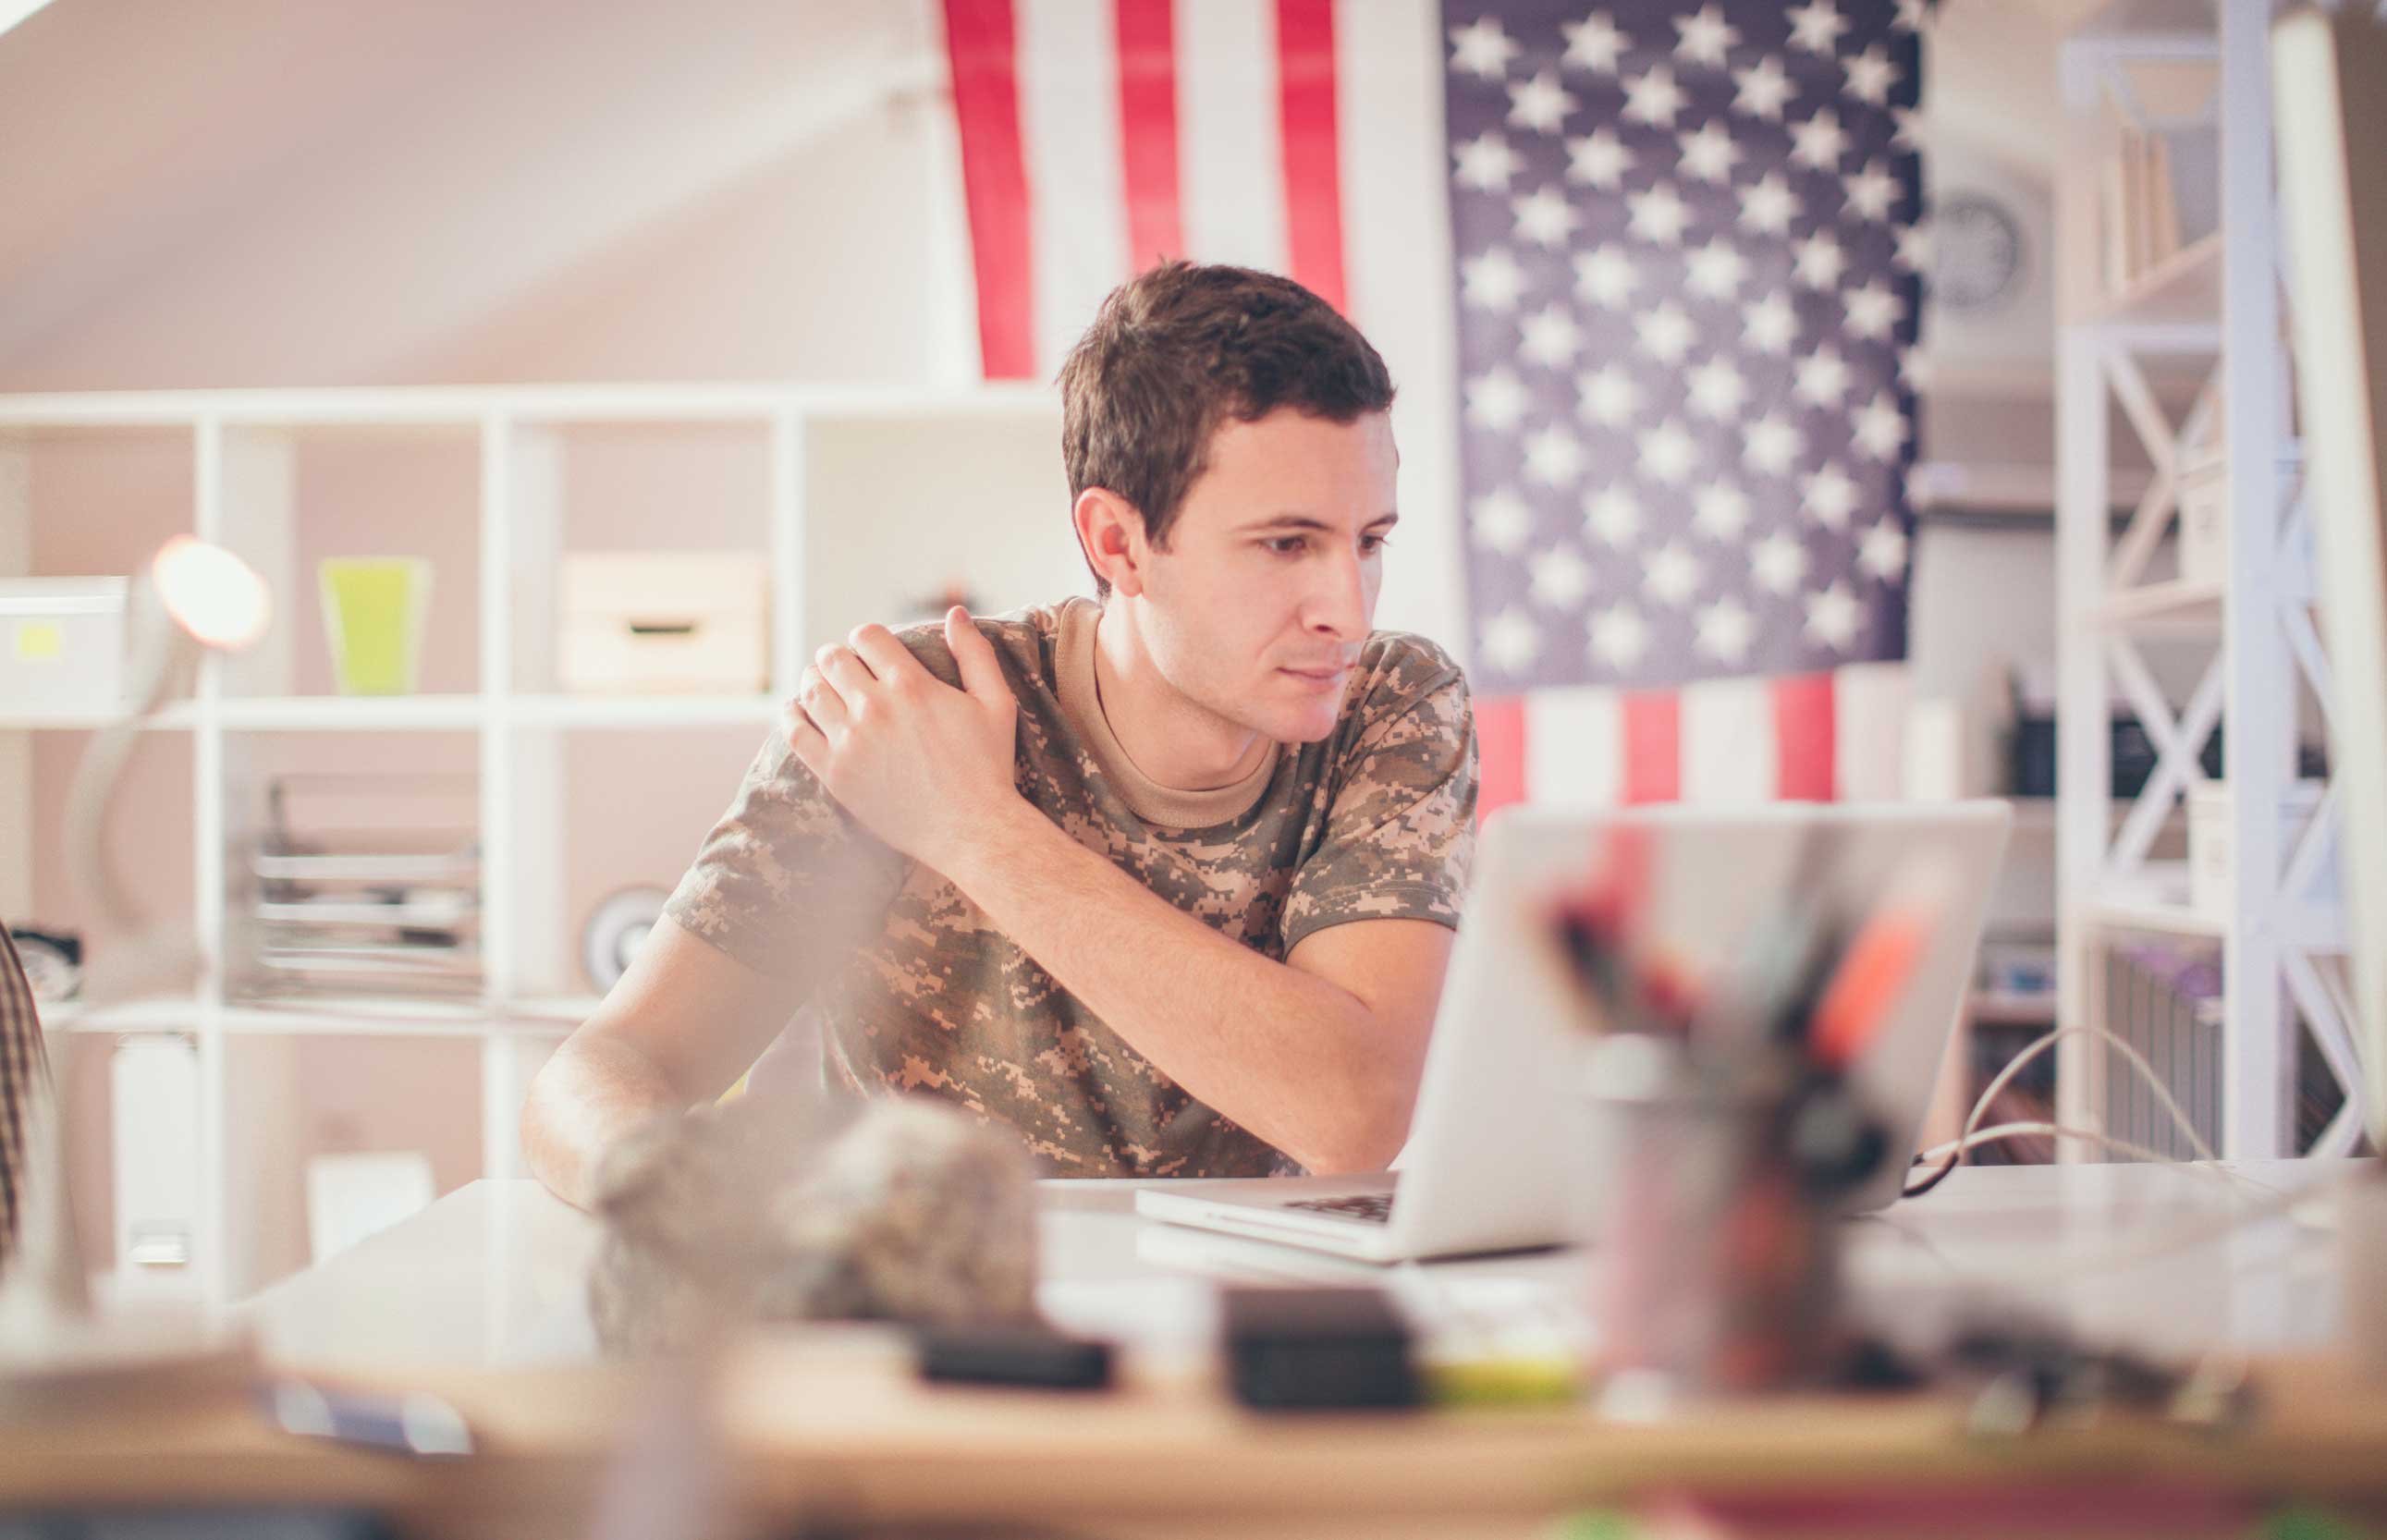 Active-duty military members are given a number of financial protections, and the major credit reporting agencies just added one more perk to that list.